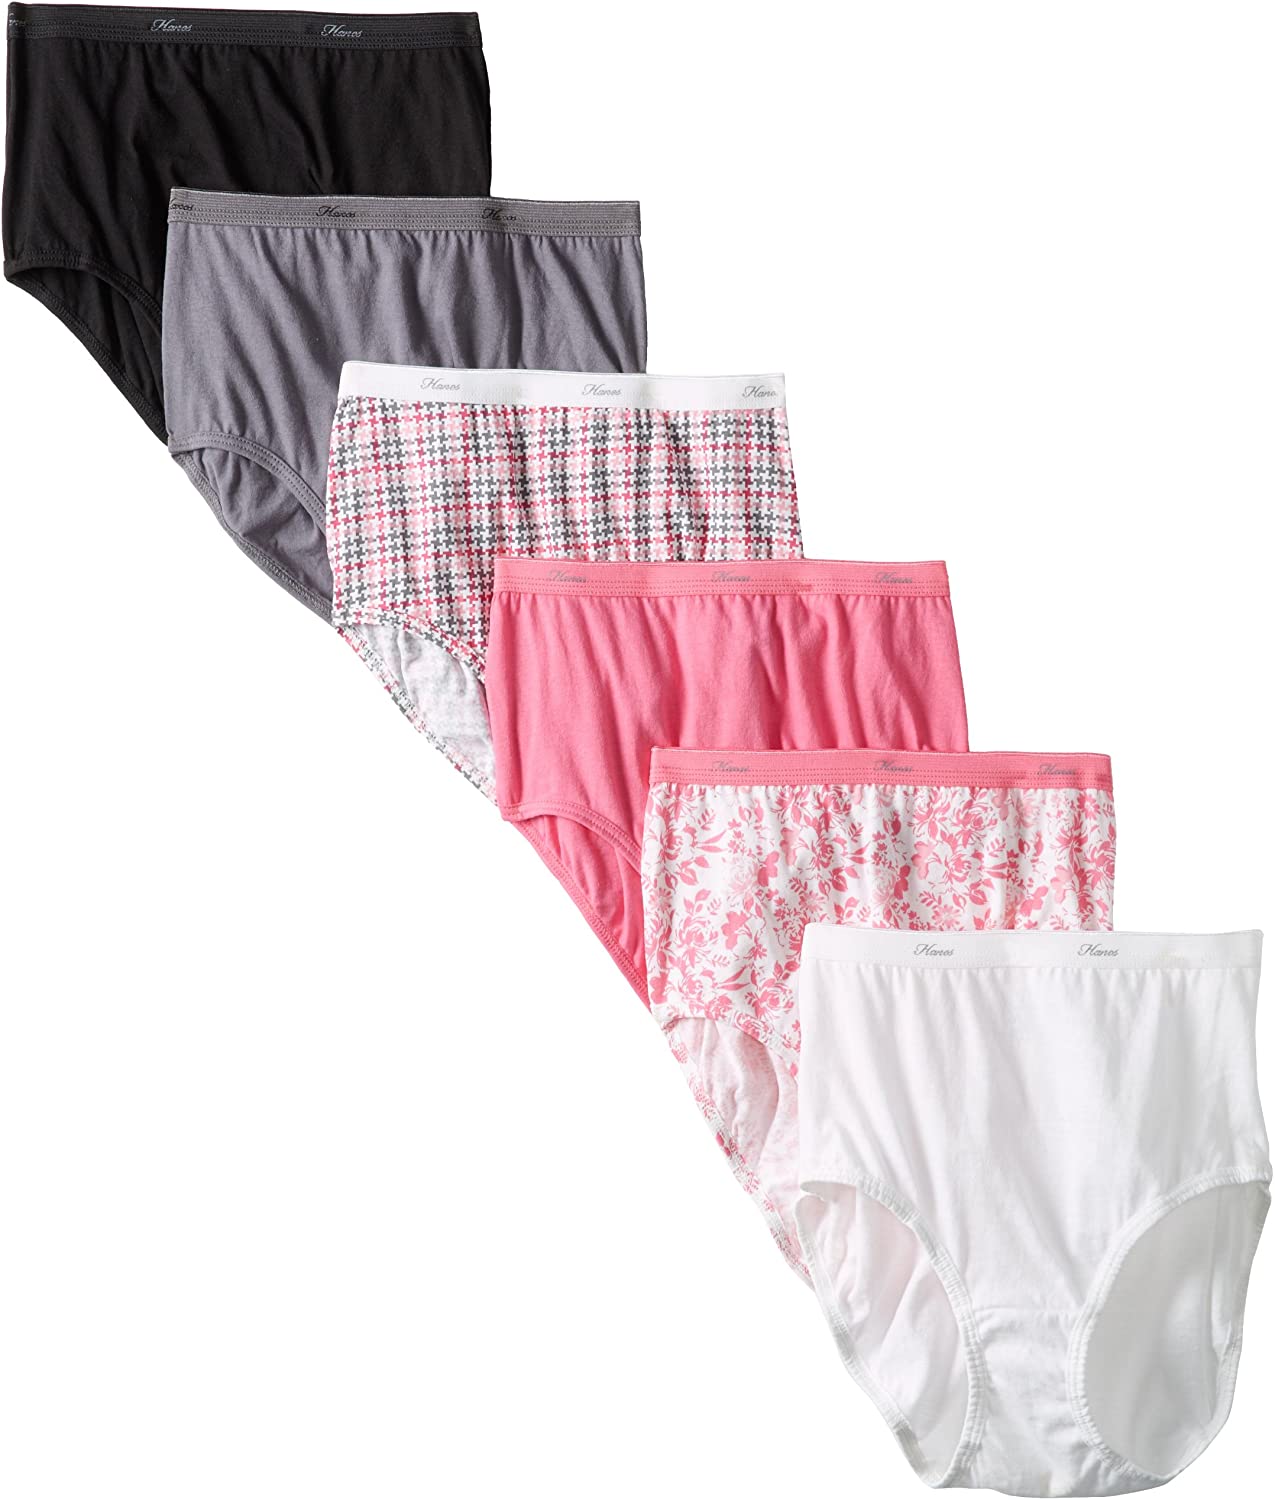 TV30P5 - Hanes Girls` Ultimate TAGLESS Cotton Stretch 5-Pack Toddler Camis